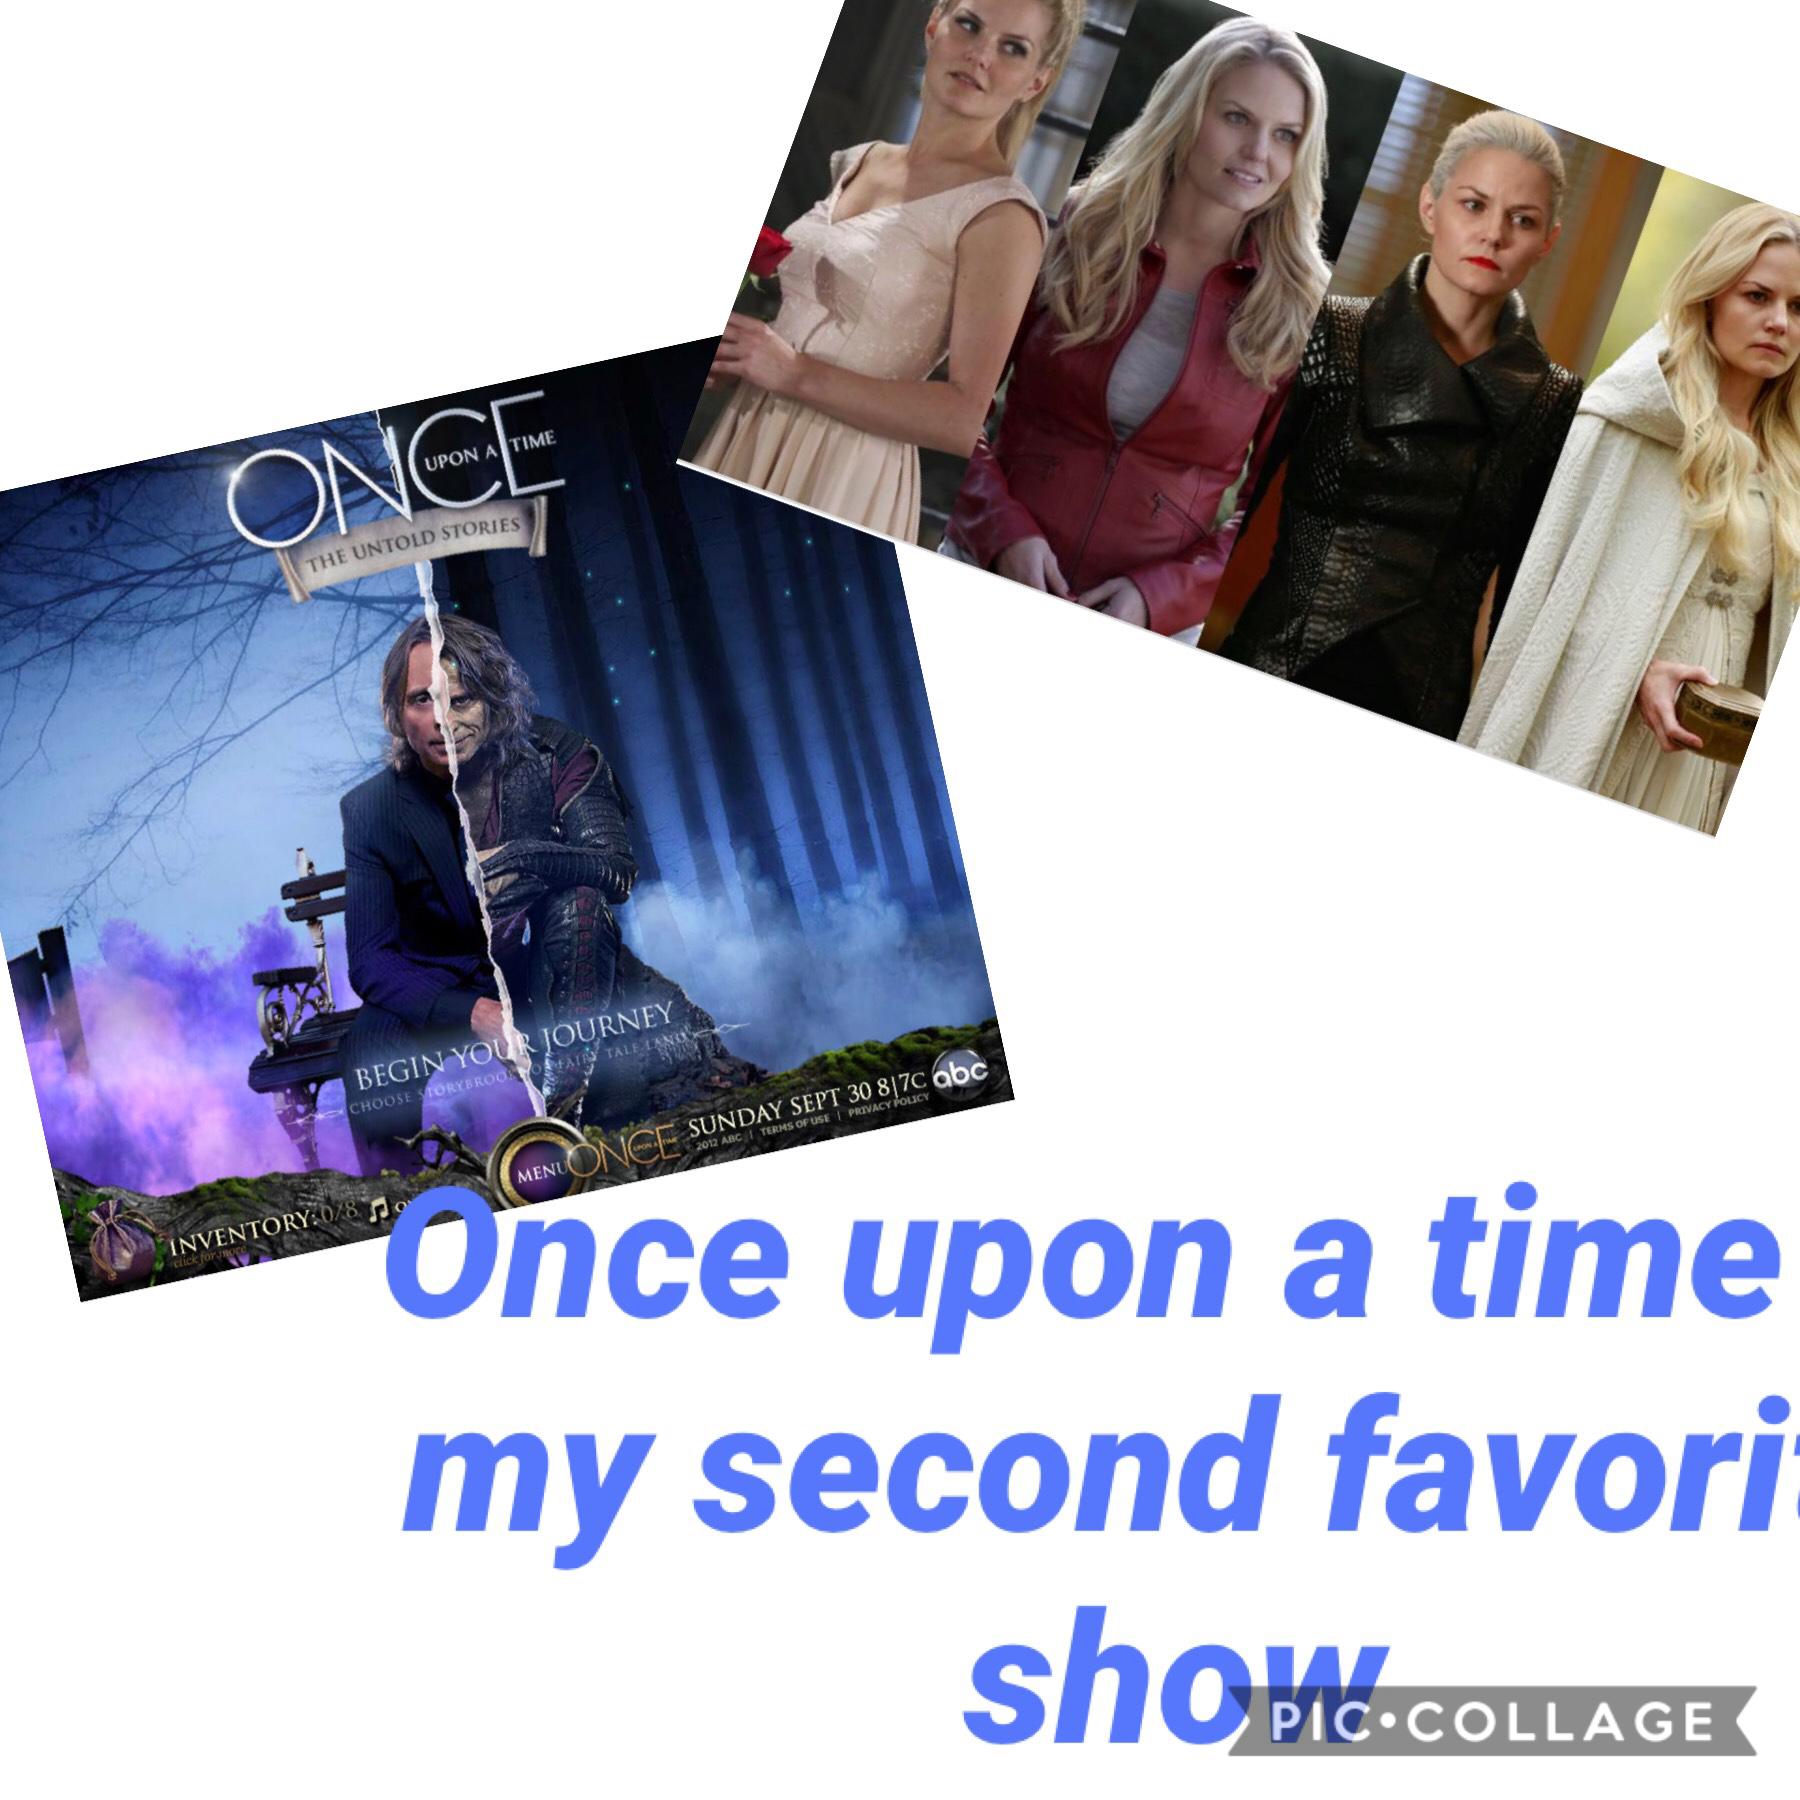 Once upon a time is my second favorite show!!!🖤💜💙